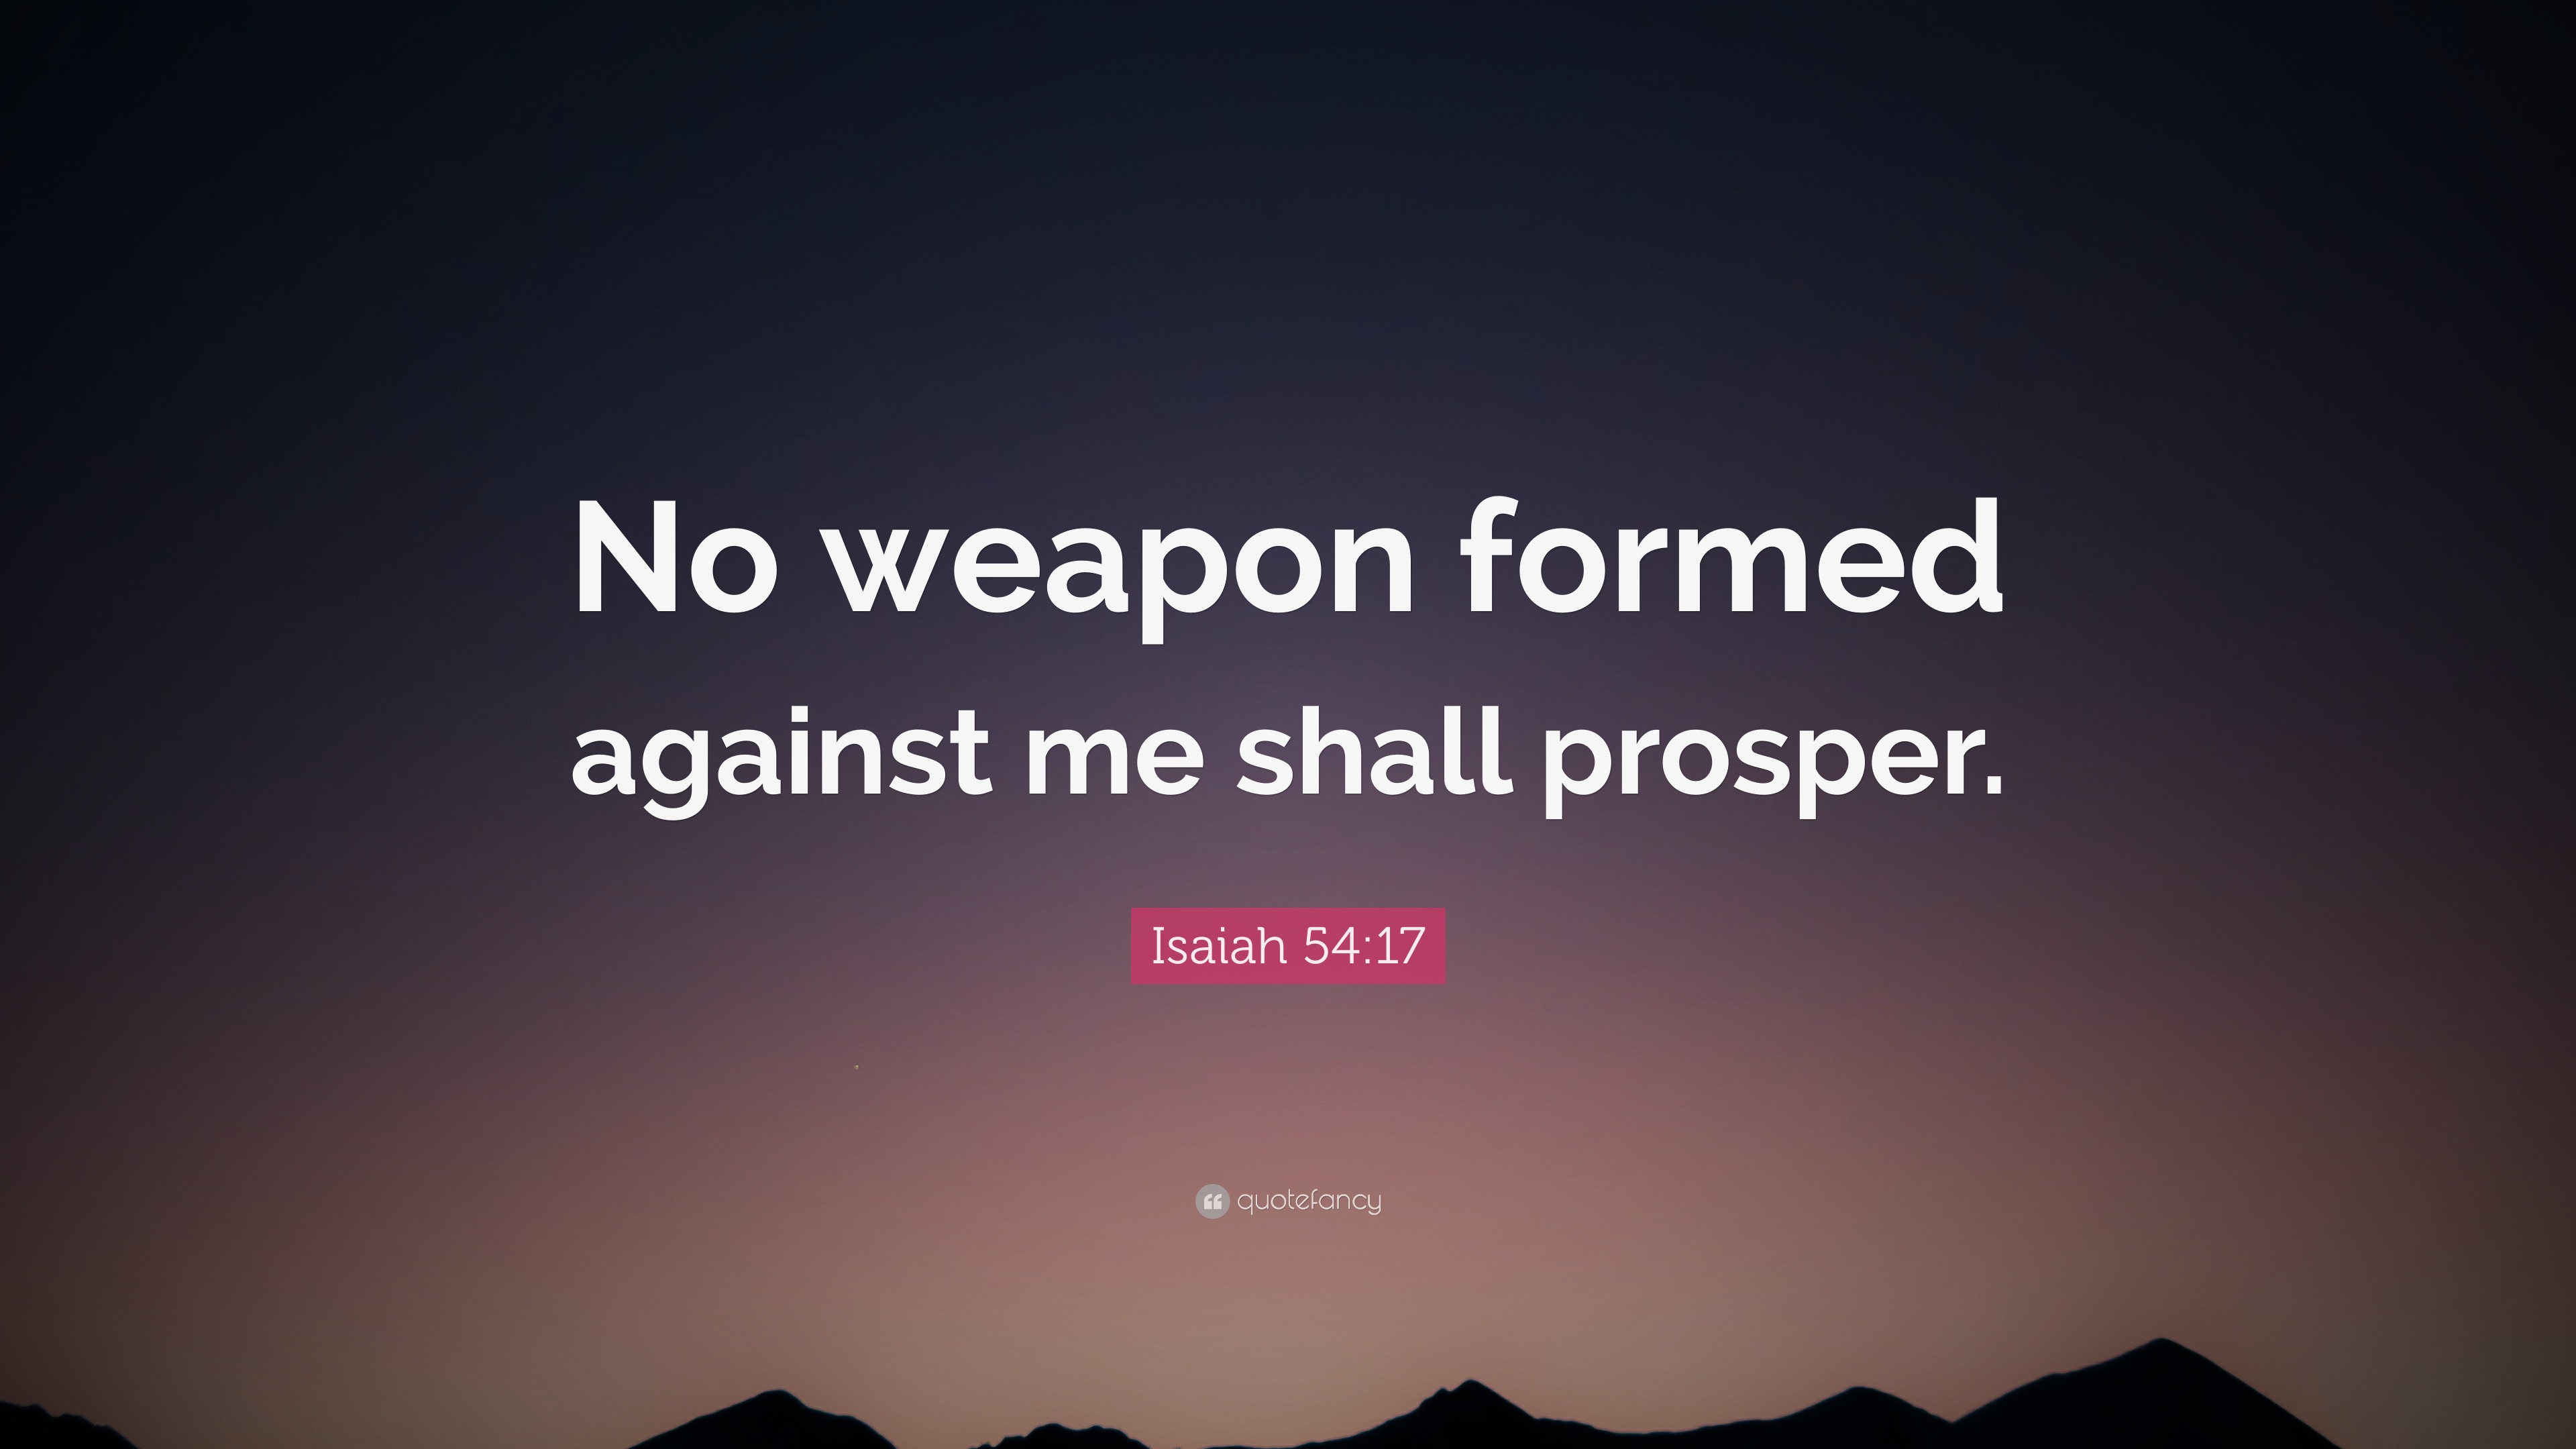 Ray Lewis Quote: "No weapon formed against me shall prosper." (10 wallpapers) - Quotefancy